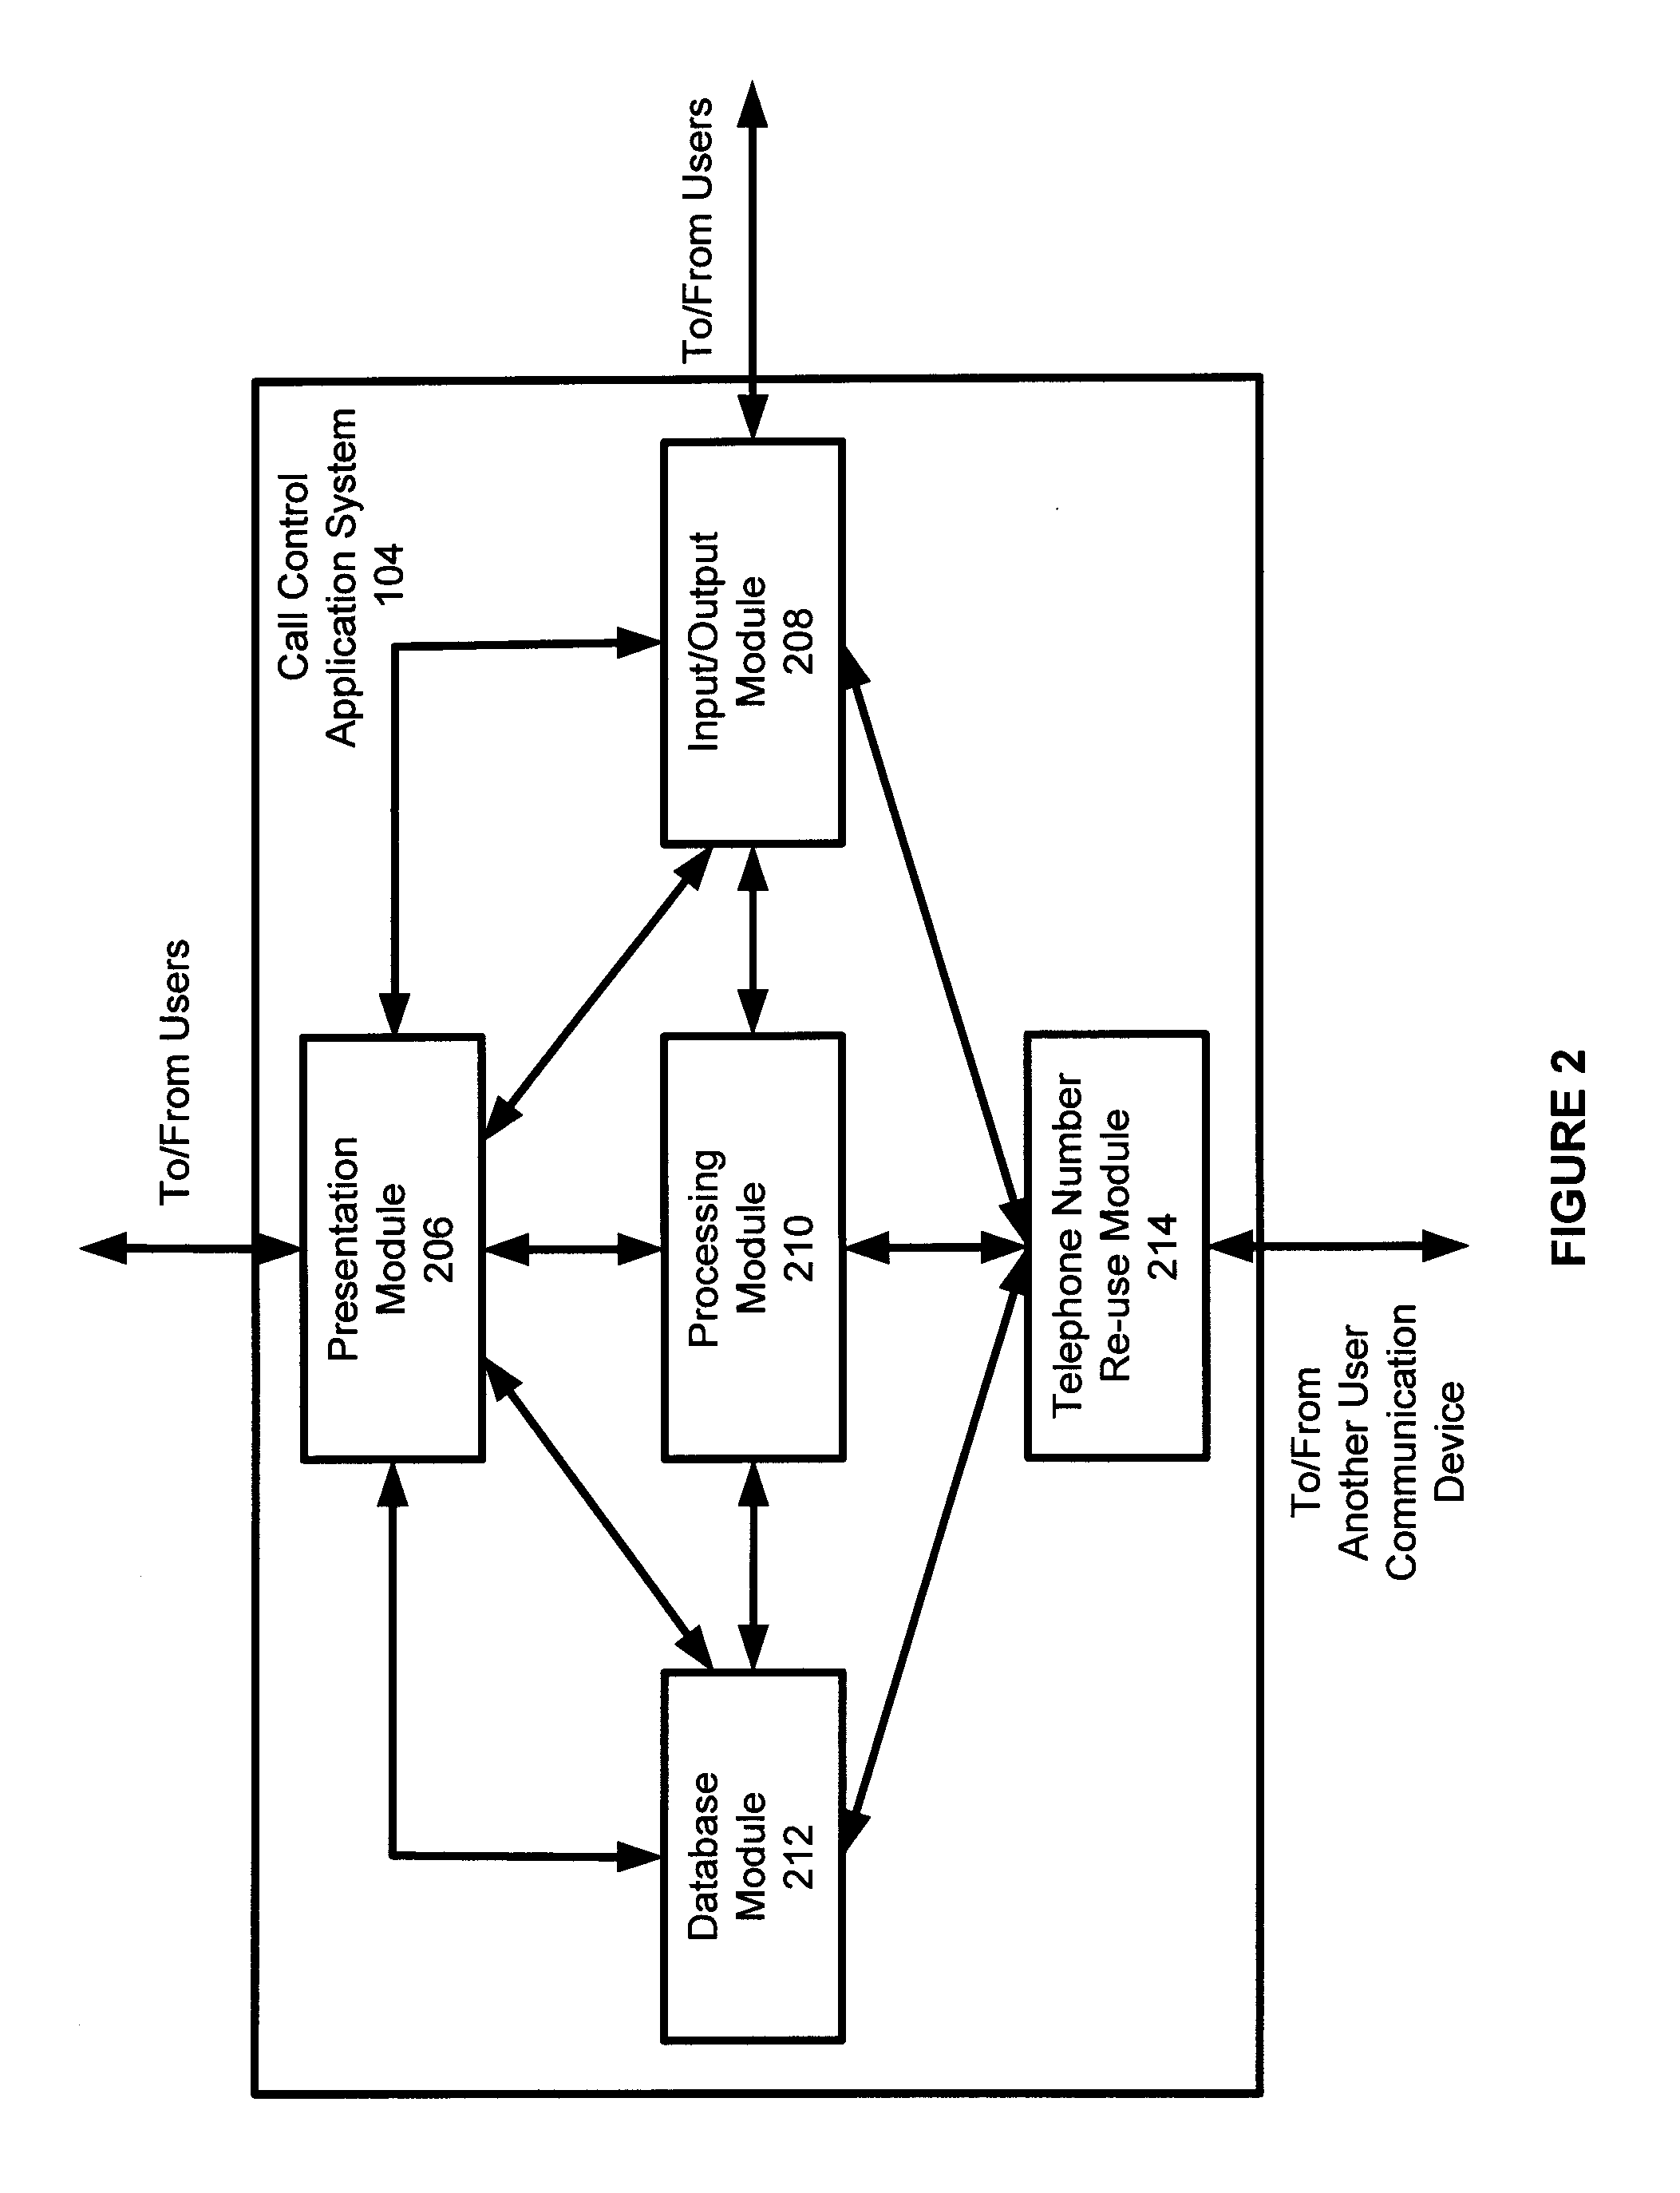 System for and method of re-using public domain identifications